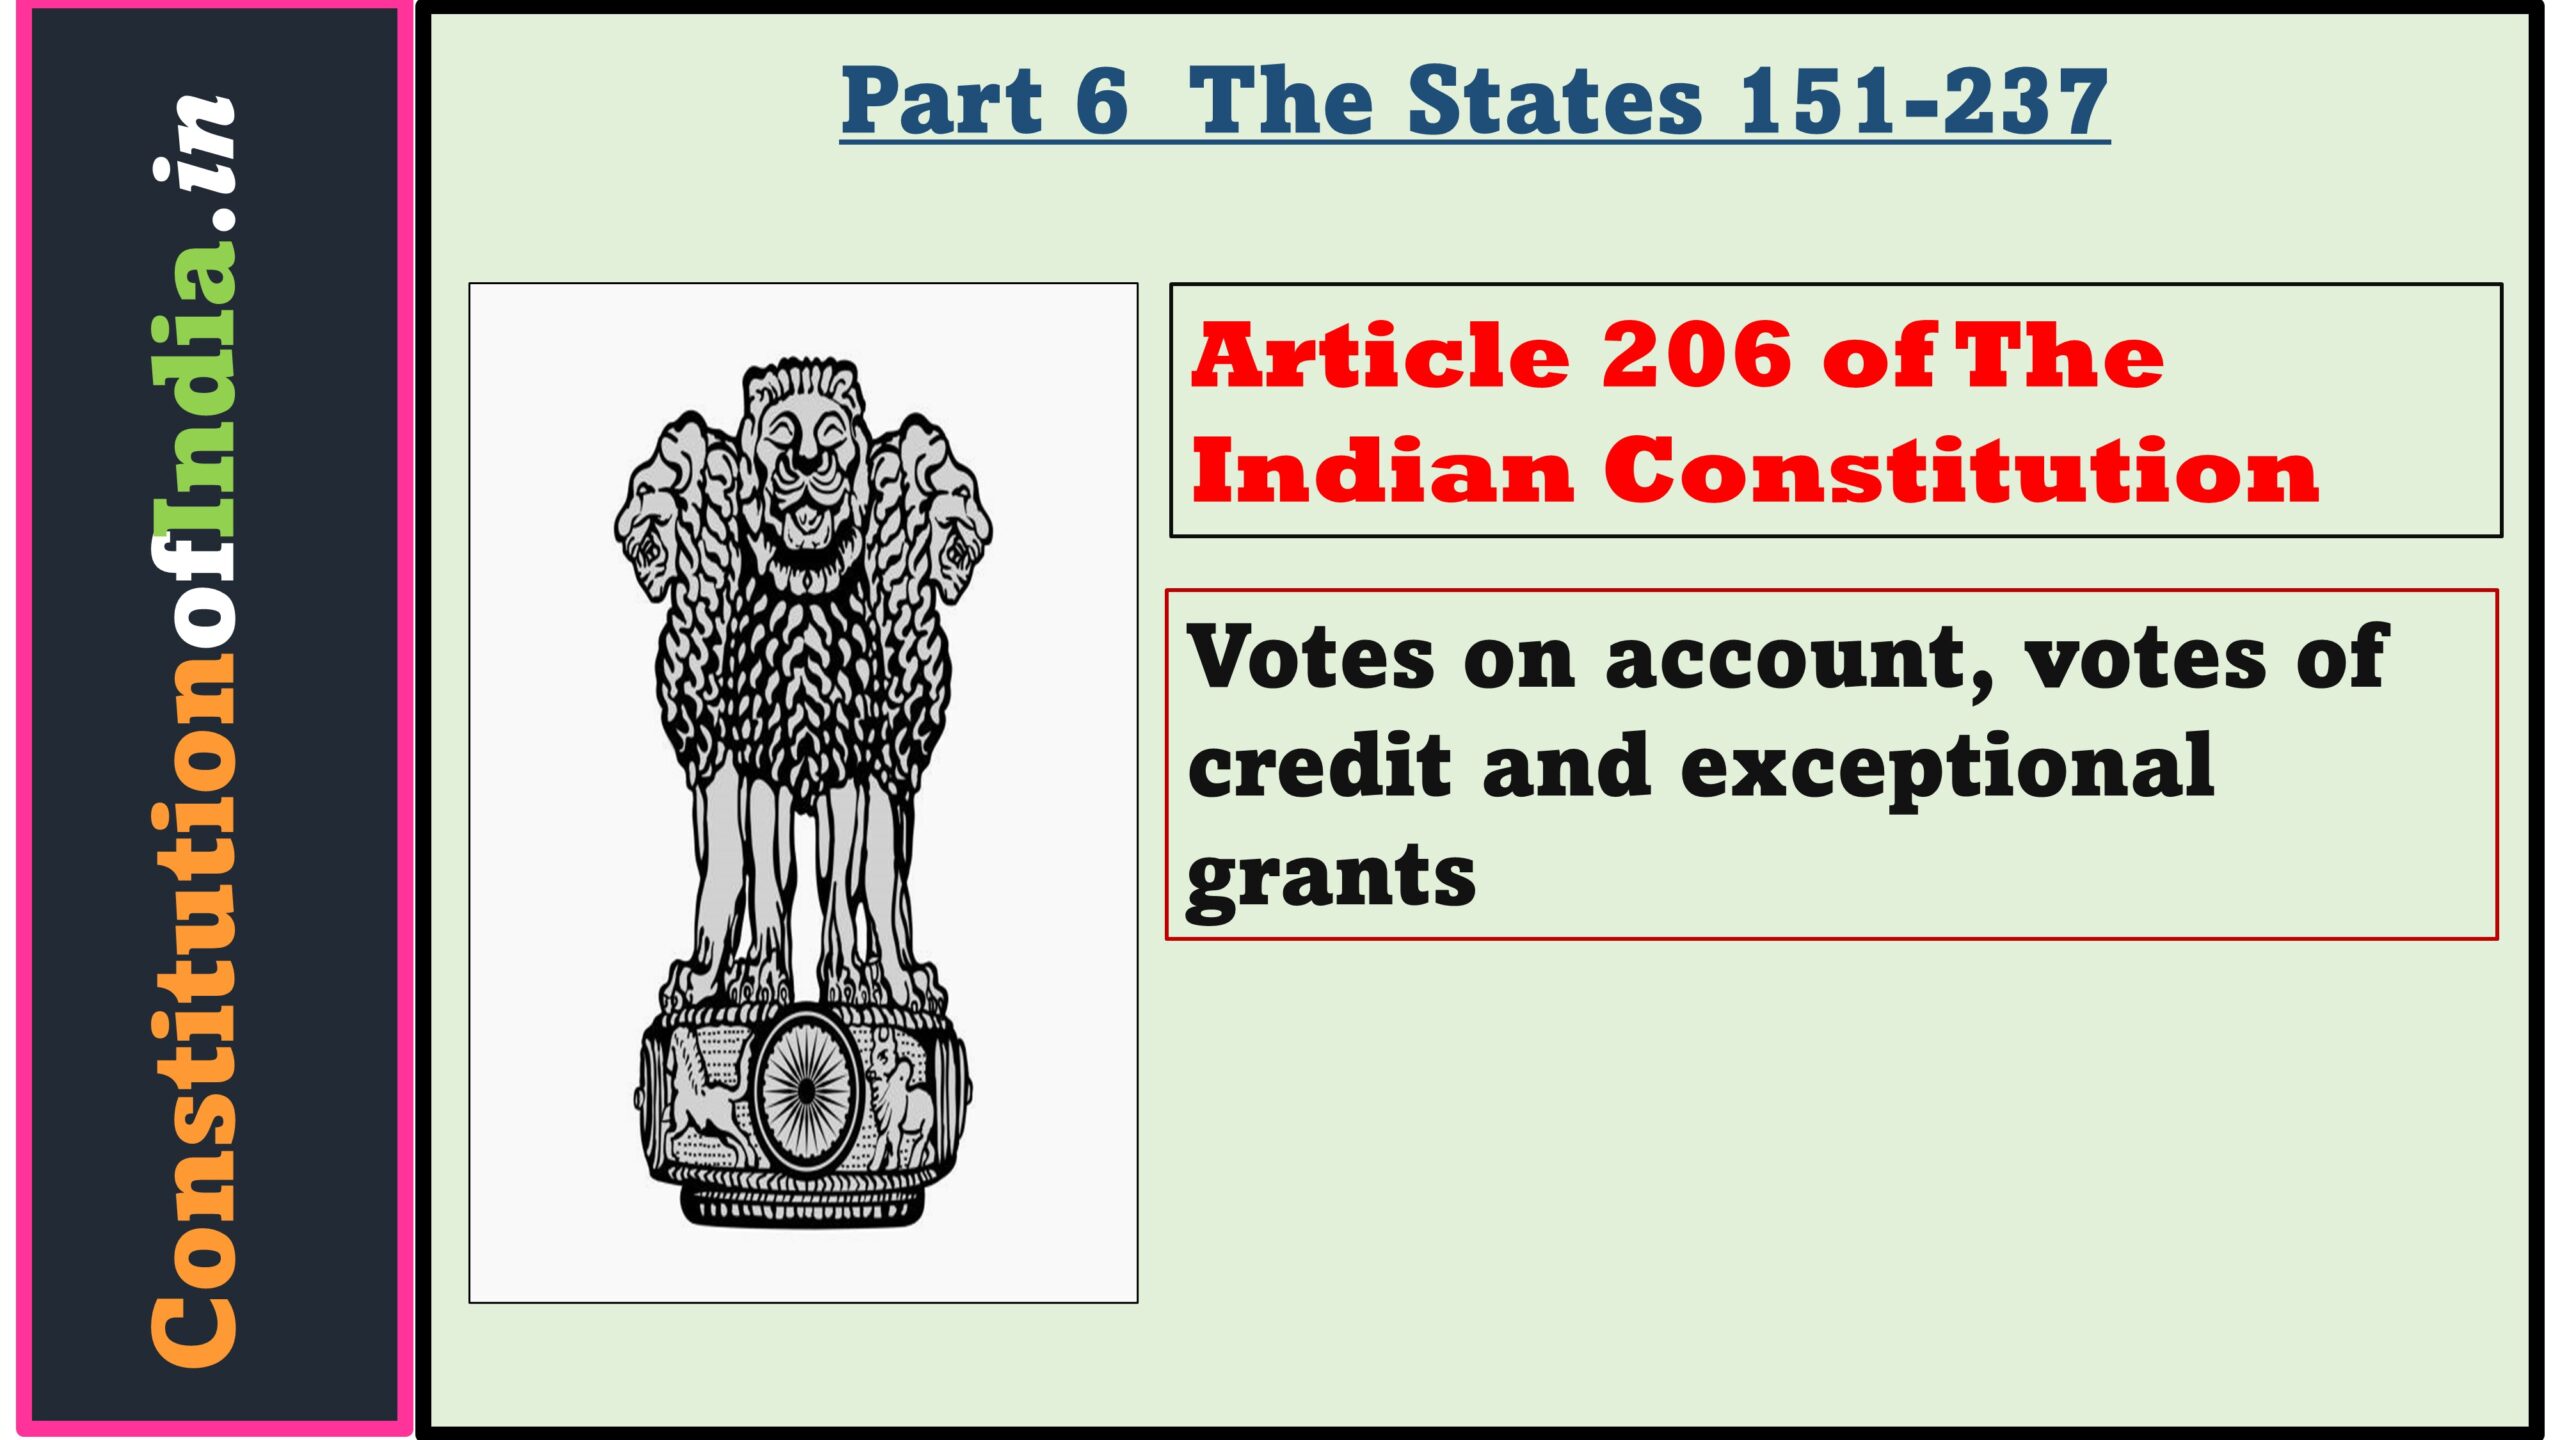 Article 206 of The Indian Constitution